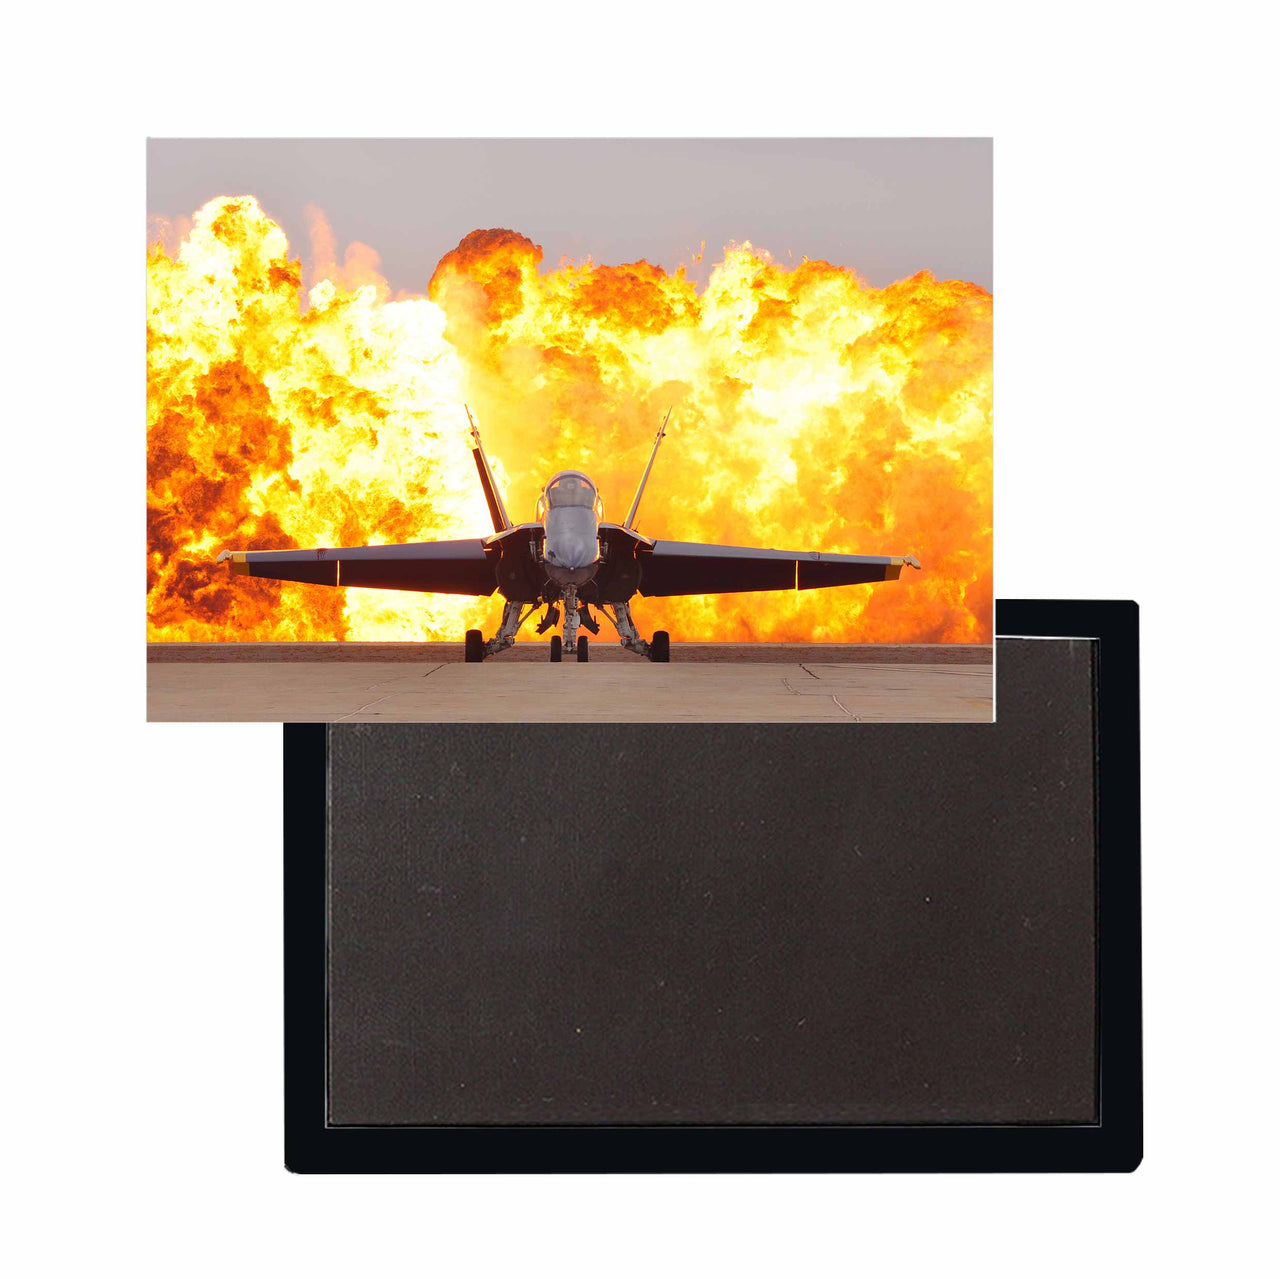 Face to Face with Air Force Jet & Flames Designed Magnets